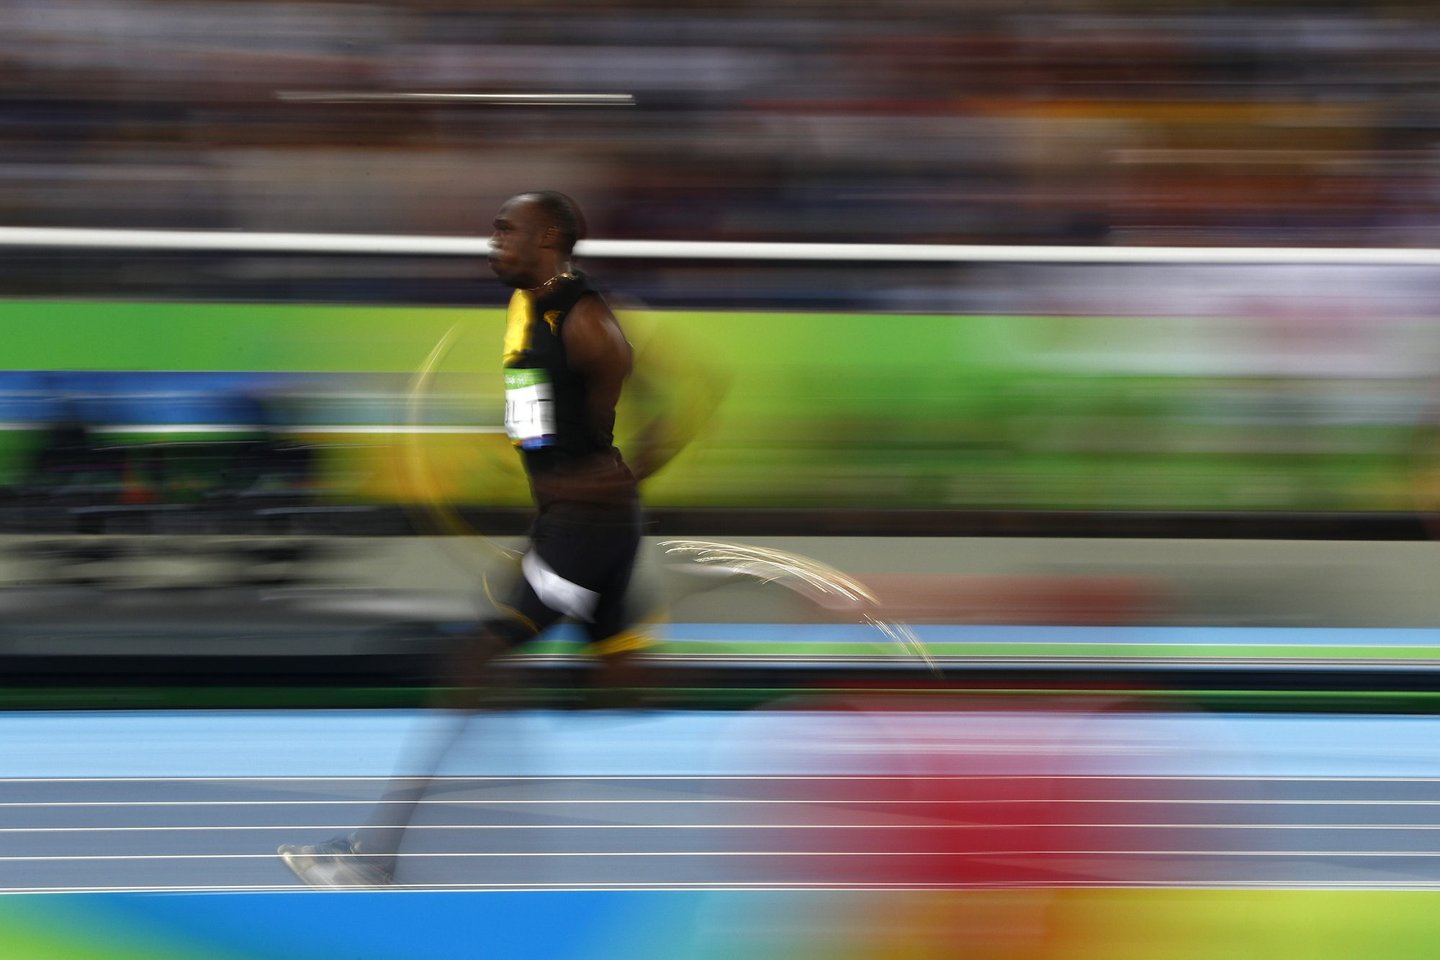 Jamaica's Usain Bolt competes in the Men's 4x100m Relay Final during the athletics event at the Rio 2016 Olympic Games at the Olympic Stadium in Rio de Janeiro on August 19, 2016. / AFP / Adrian DENNIS (Photo credit should read ADRIAN DENNIS/AFP/Getty Images)